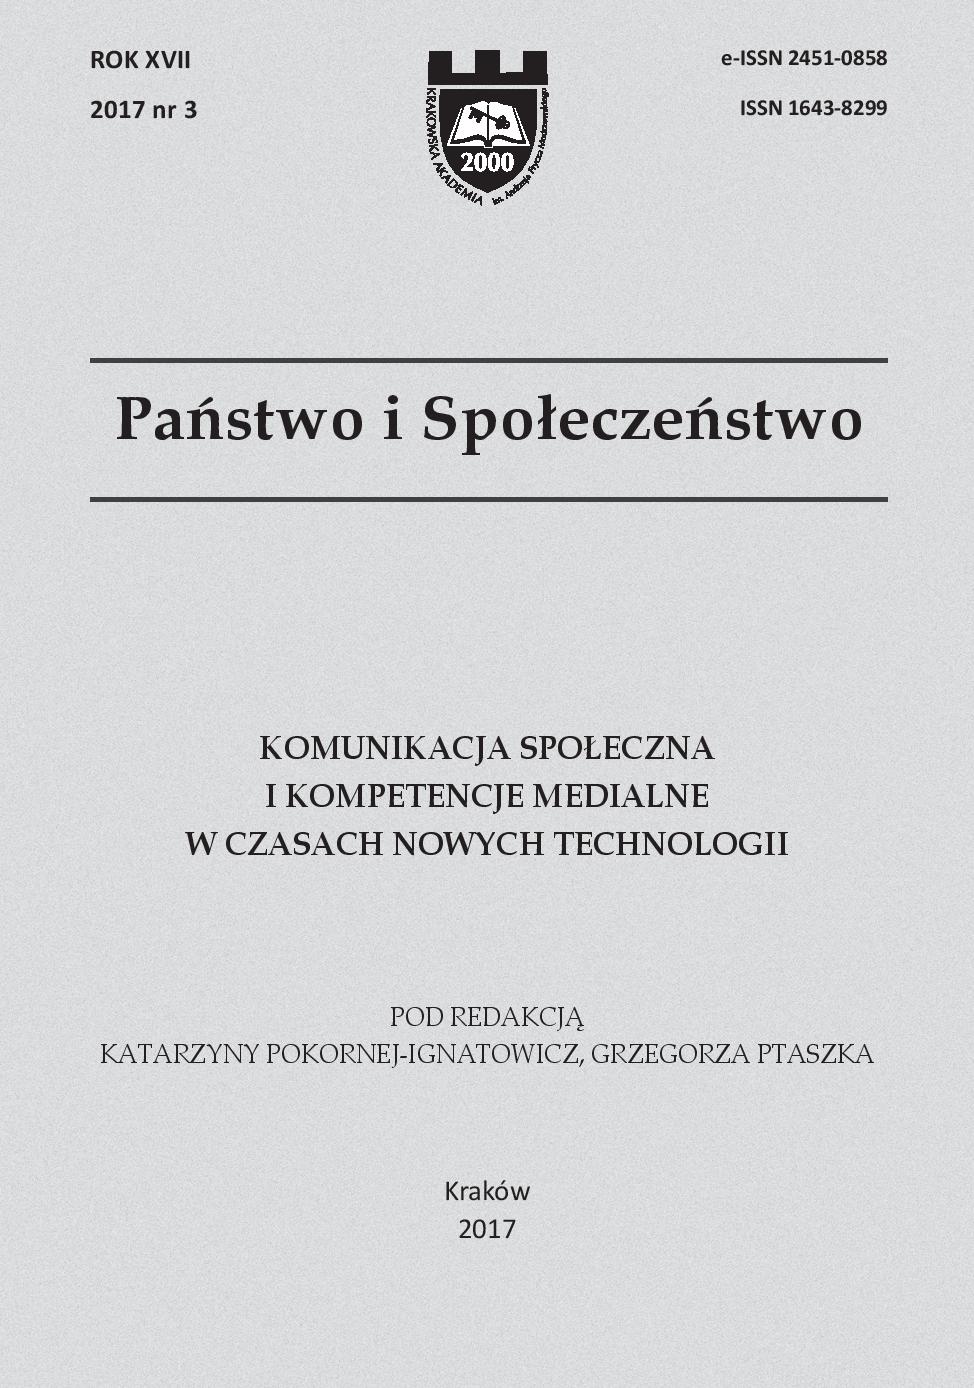 The importance of social communication in the era of new technologies on the example of the promotion of the idea of Participatory Budgeting in Cracow in 2015 Cover Image